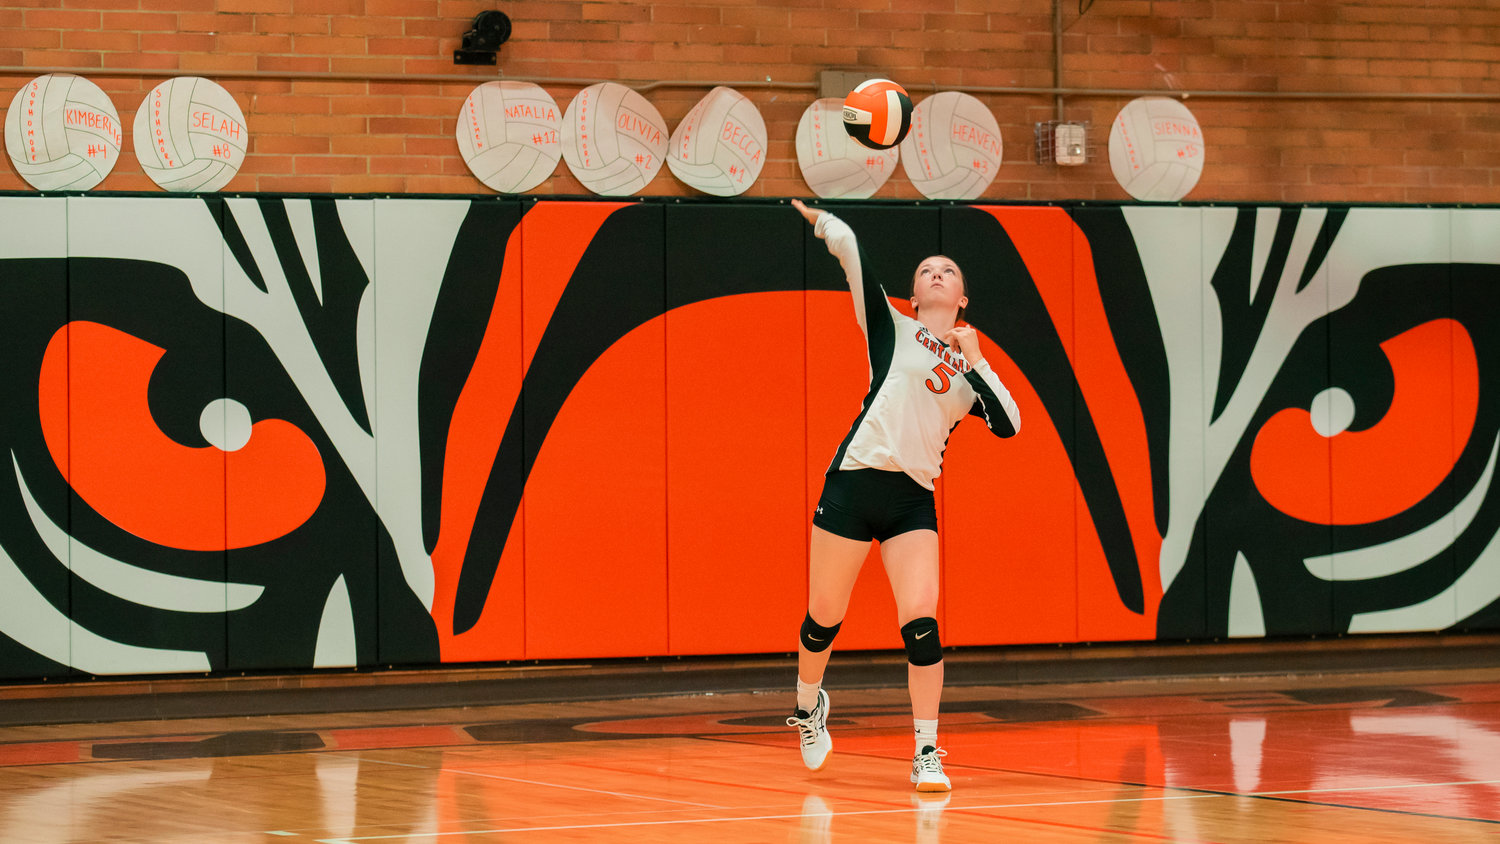 Centralia’s Gracie Schofield (5) prepares to serve up a shot during a game Tuesday night at Centralia High School.